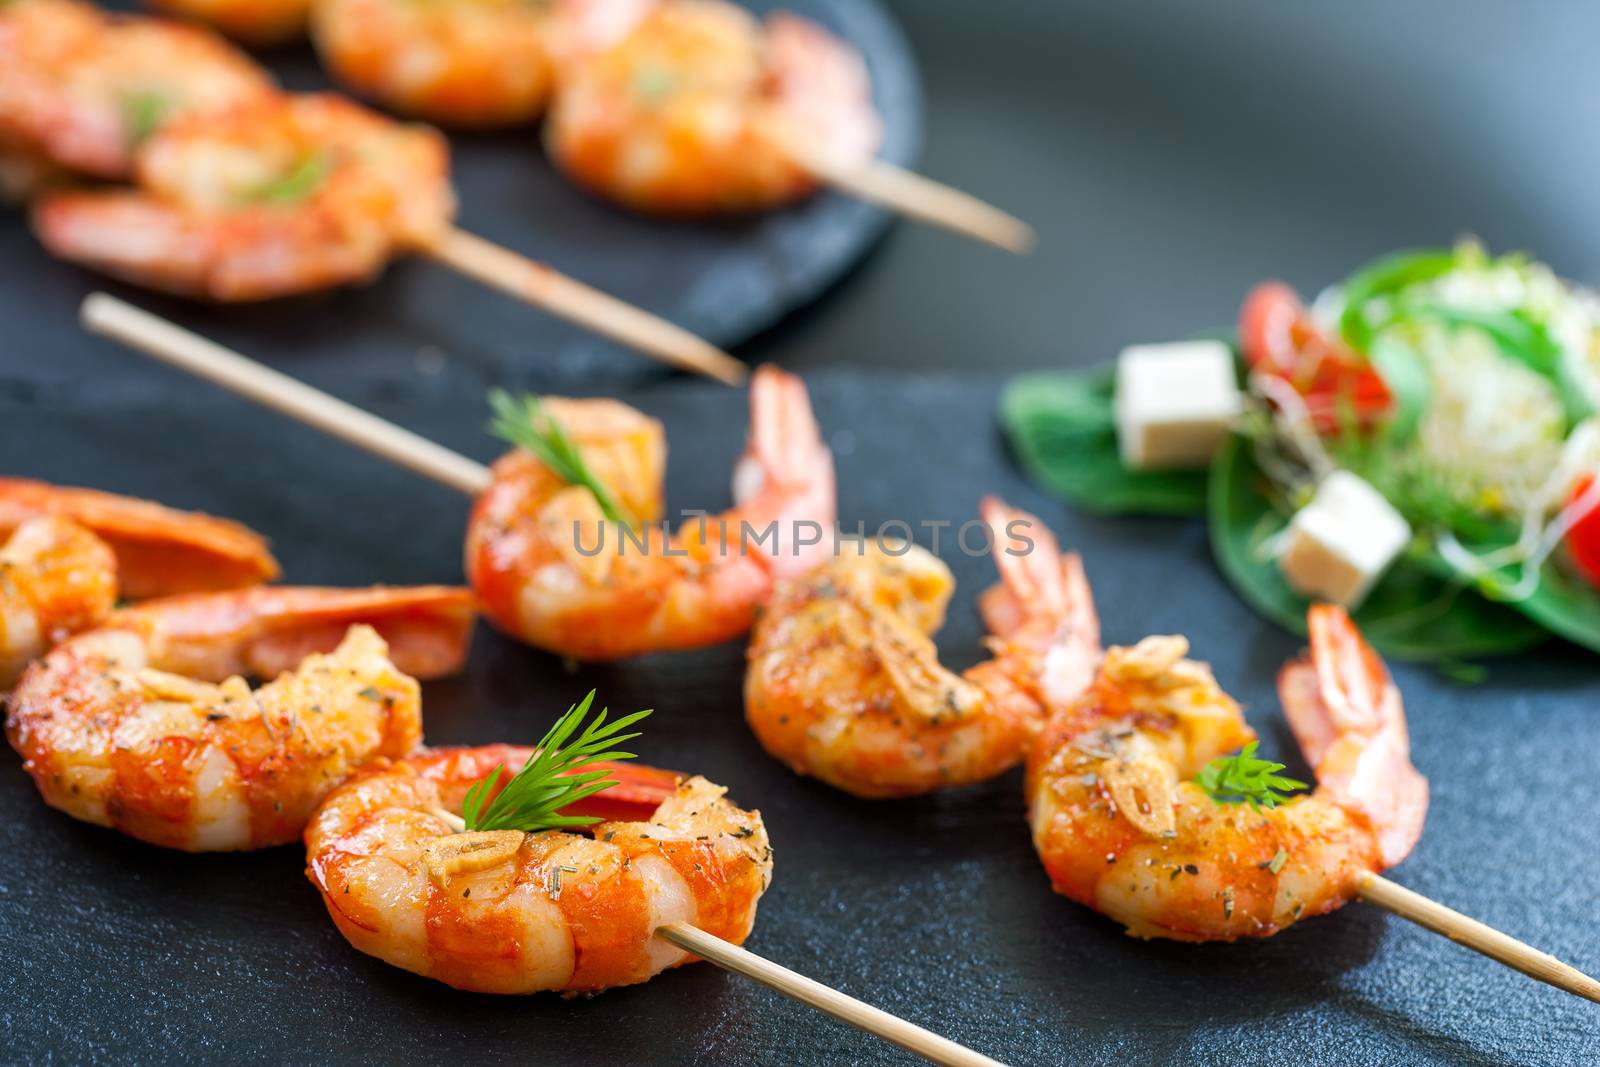 Macro close up of catering shrimp brochettes grilled with herbs. Out of focus salad in background.